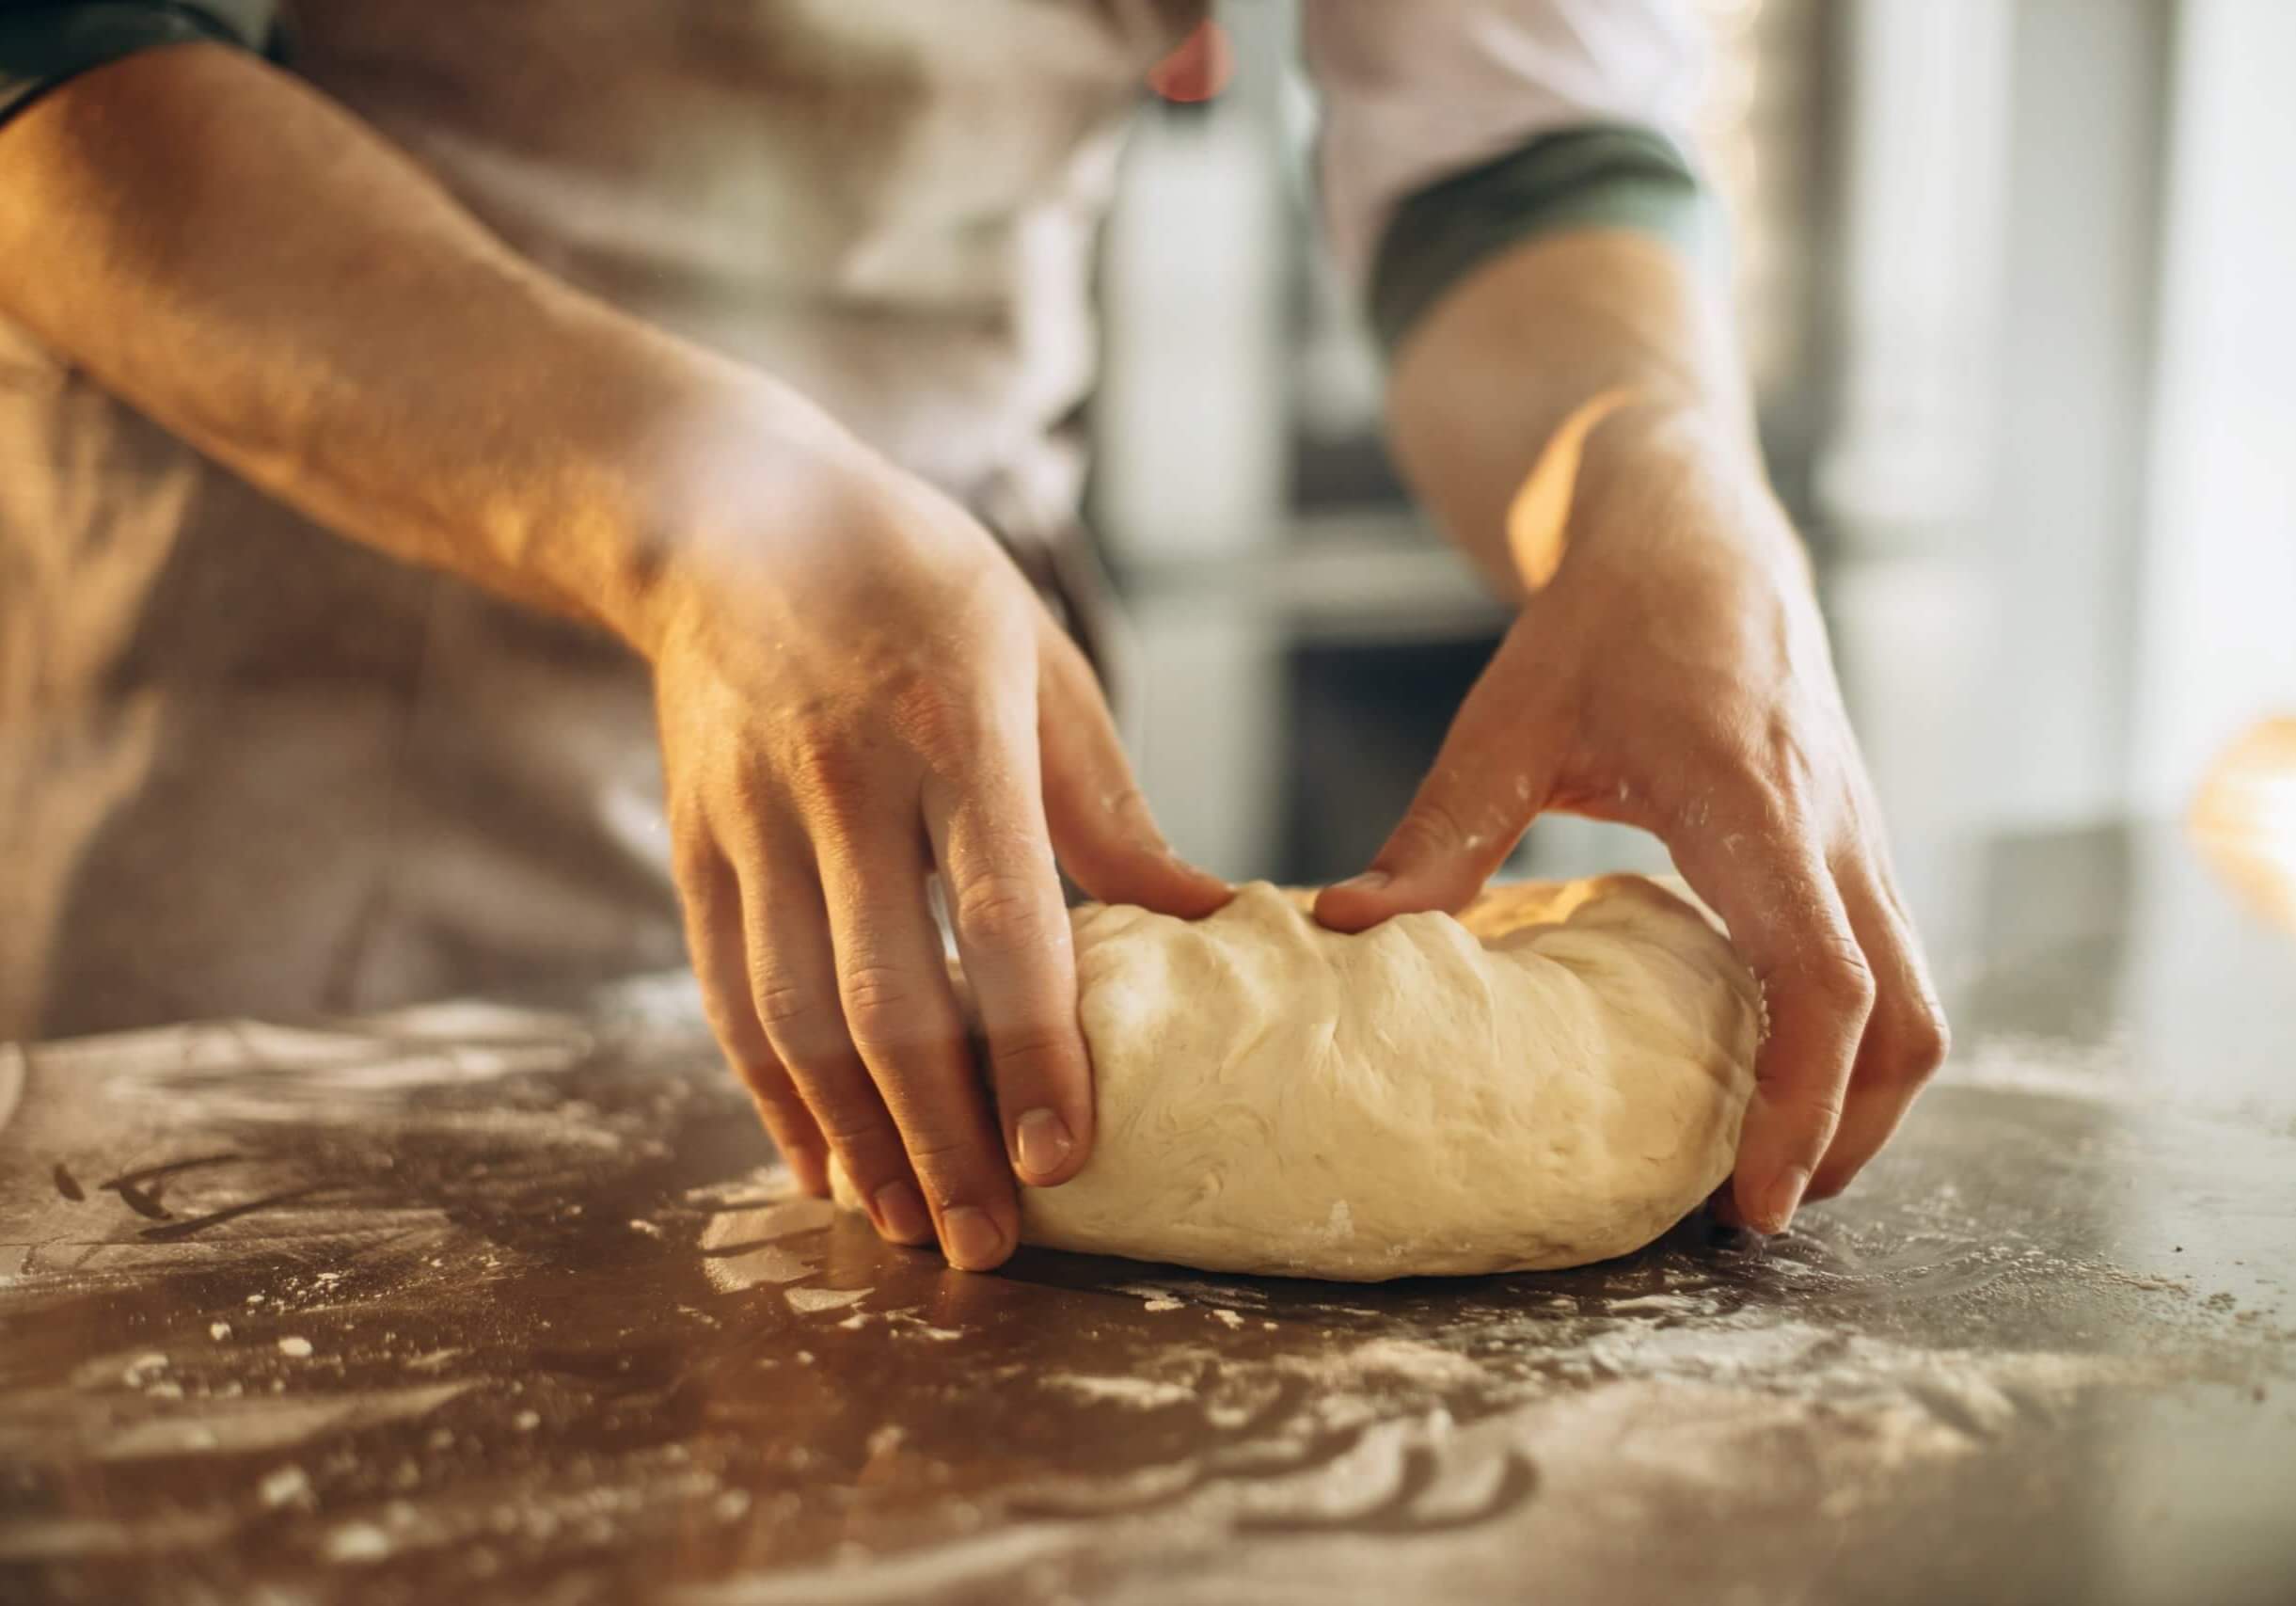 Man kneads the dough for bread